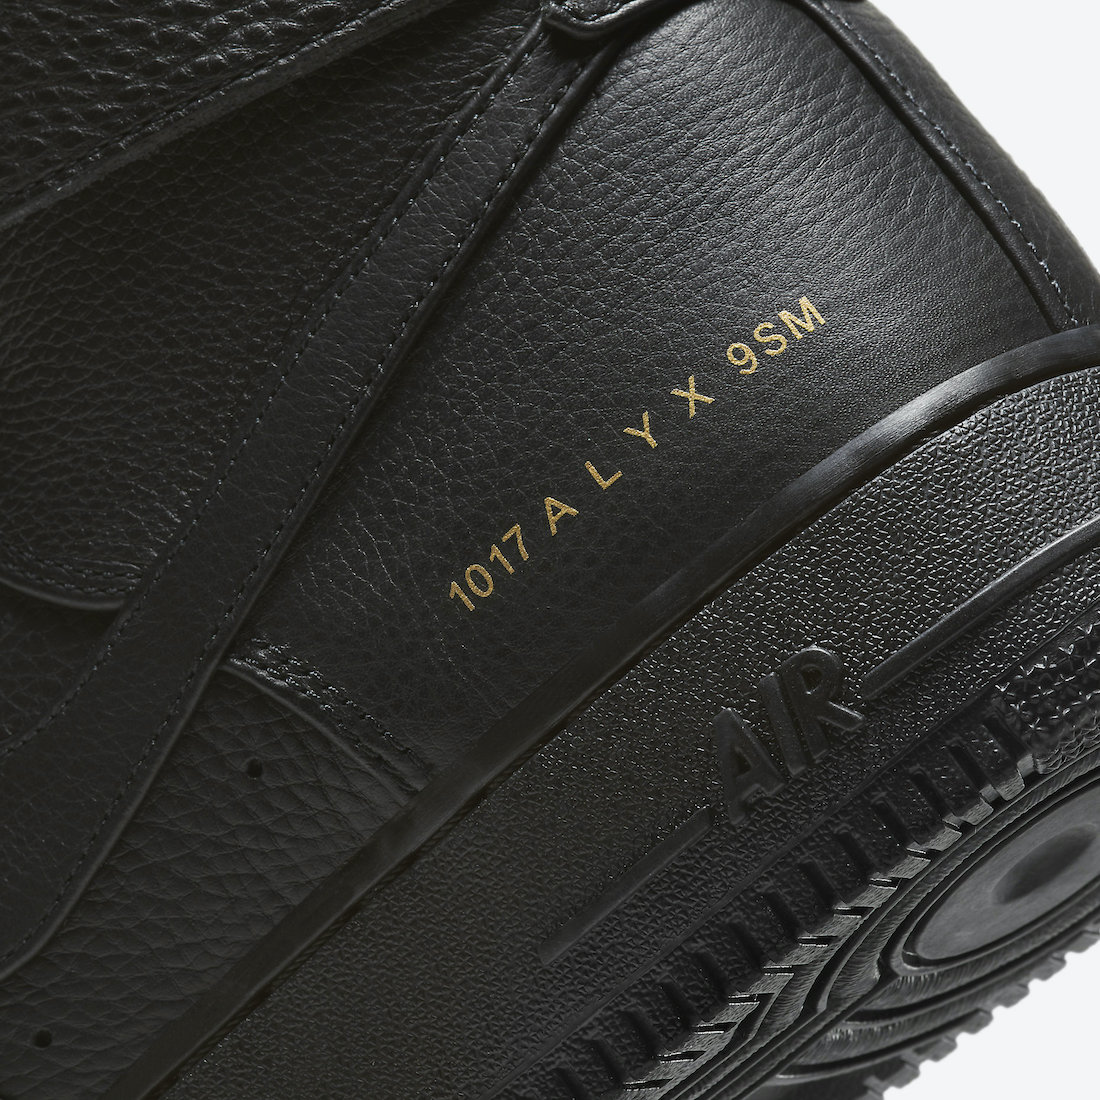 Alyx Nike Air Force 1 Release Date Info | SneakerFiles